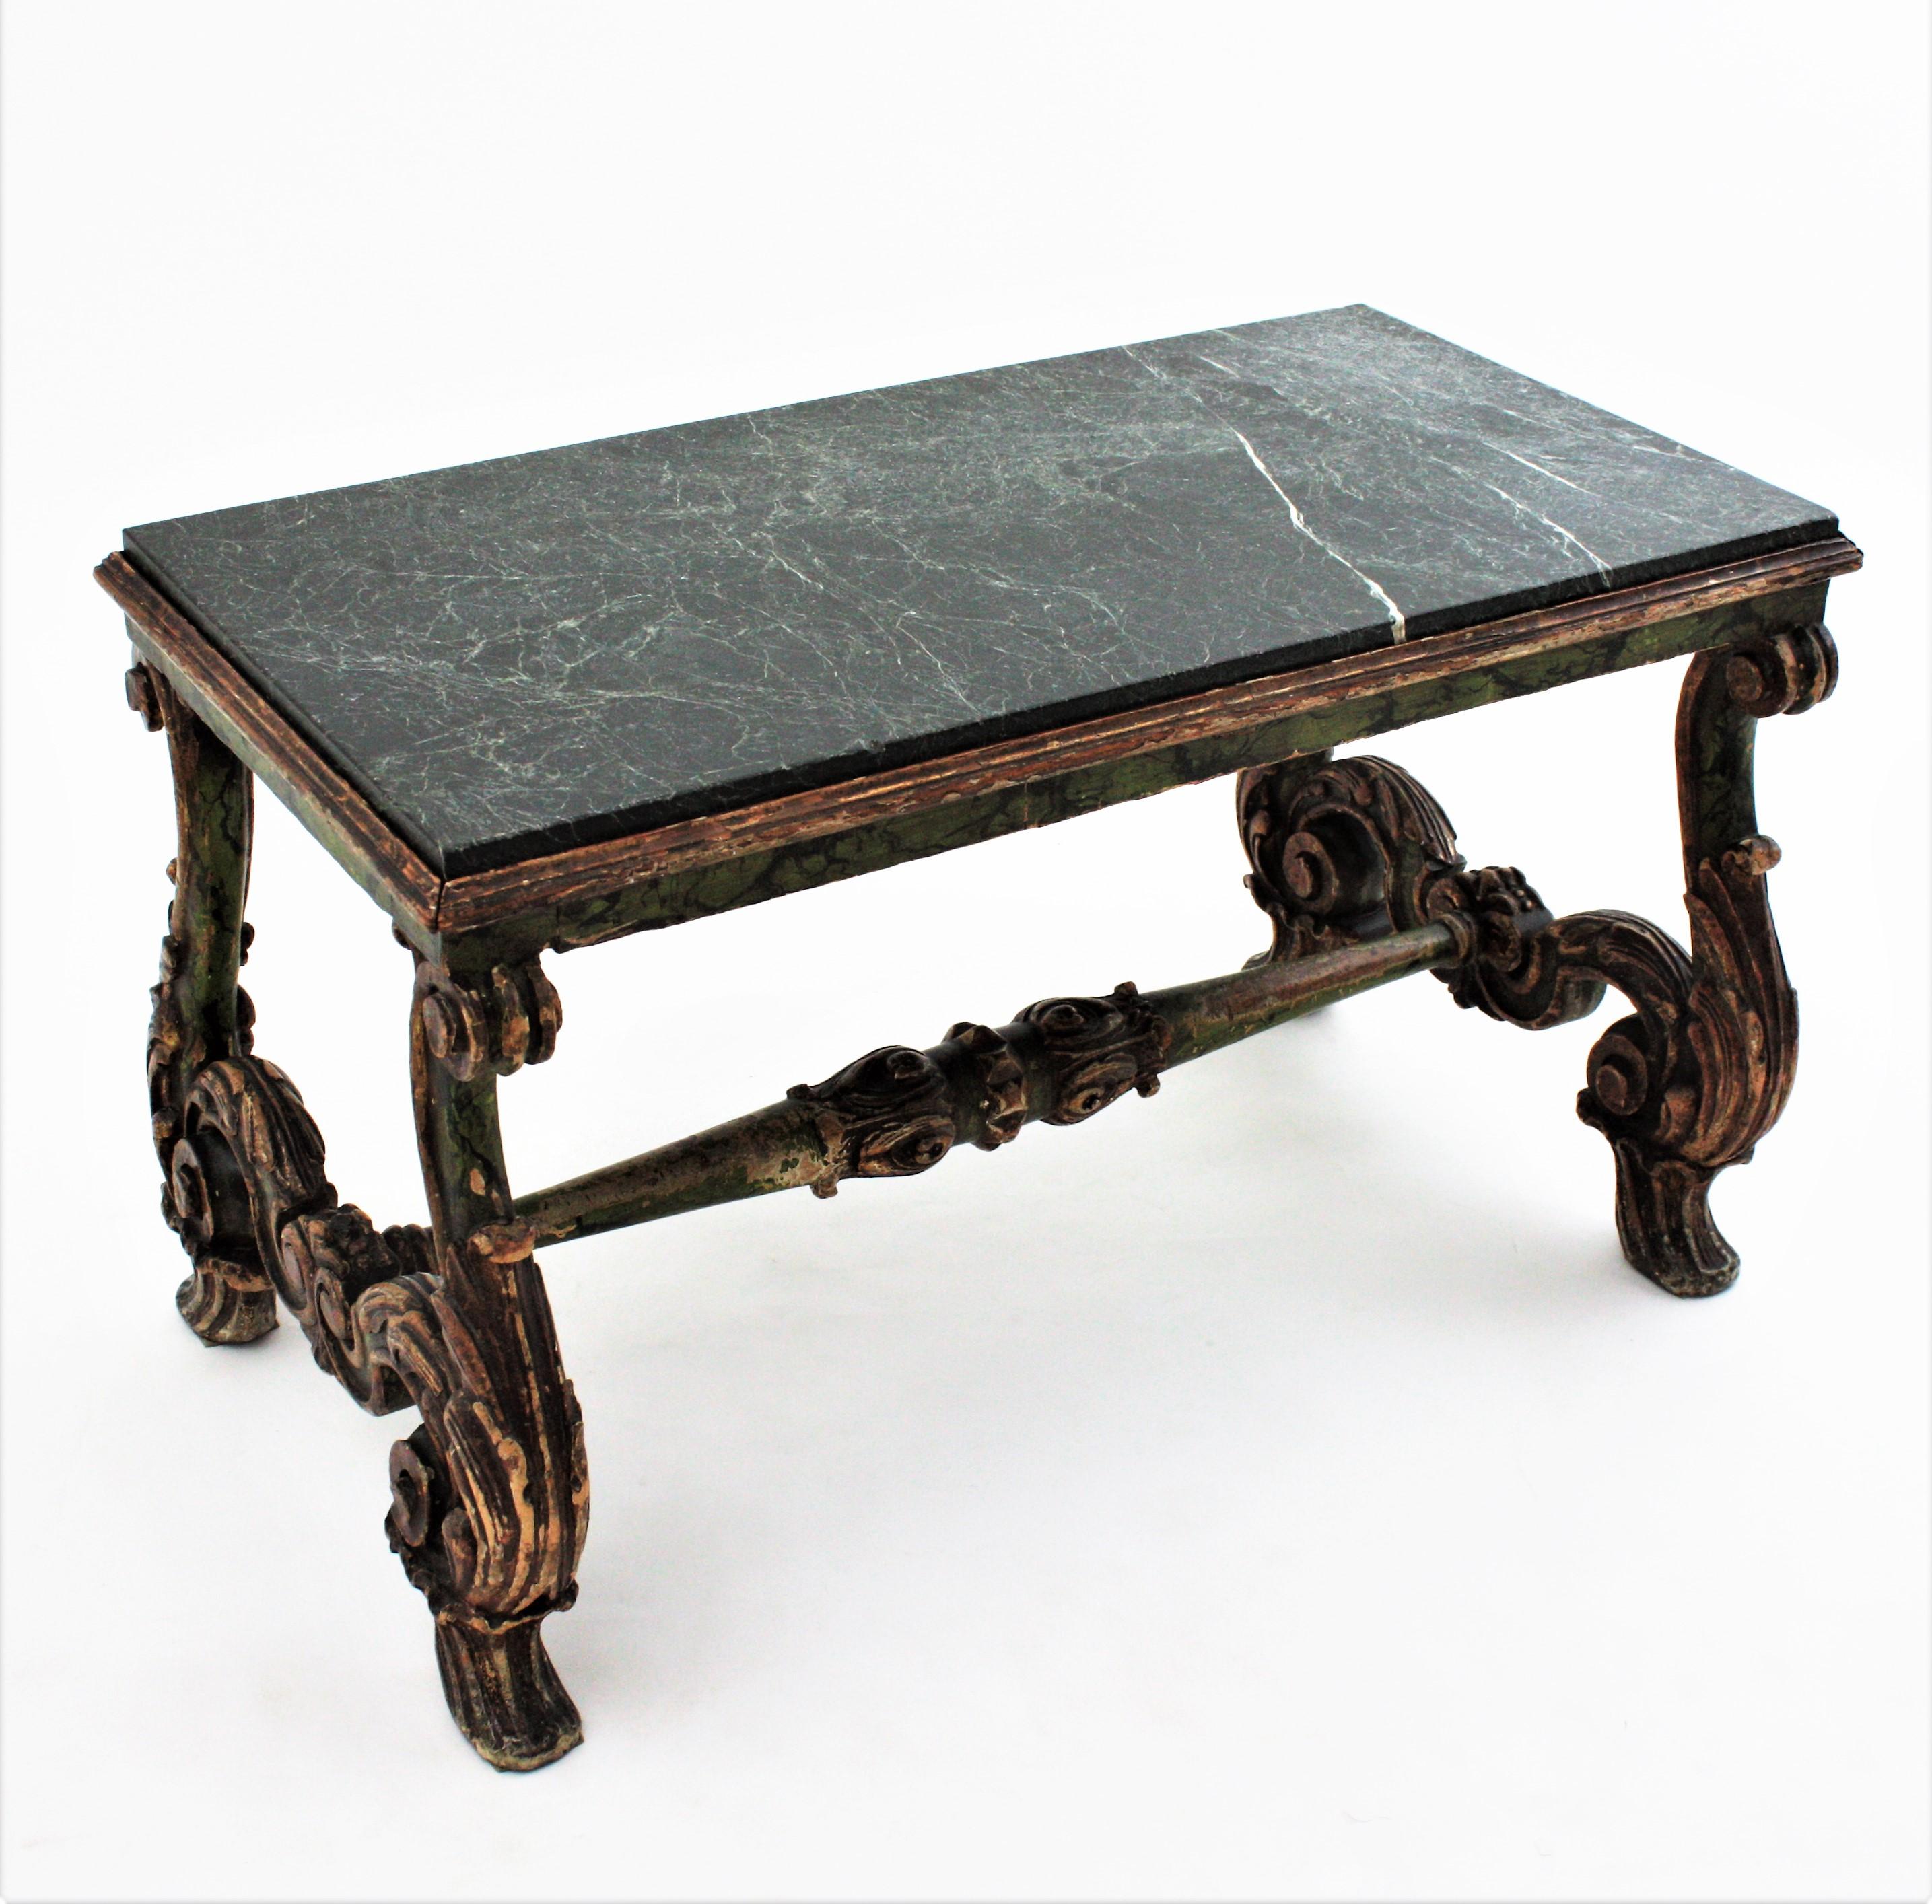 Spanish Baroque Carved Wood Coffee Table with Green Marble Top For Sale 1